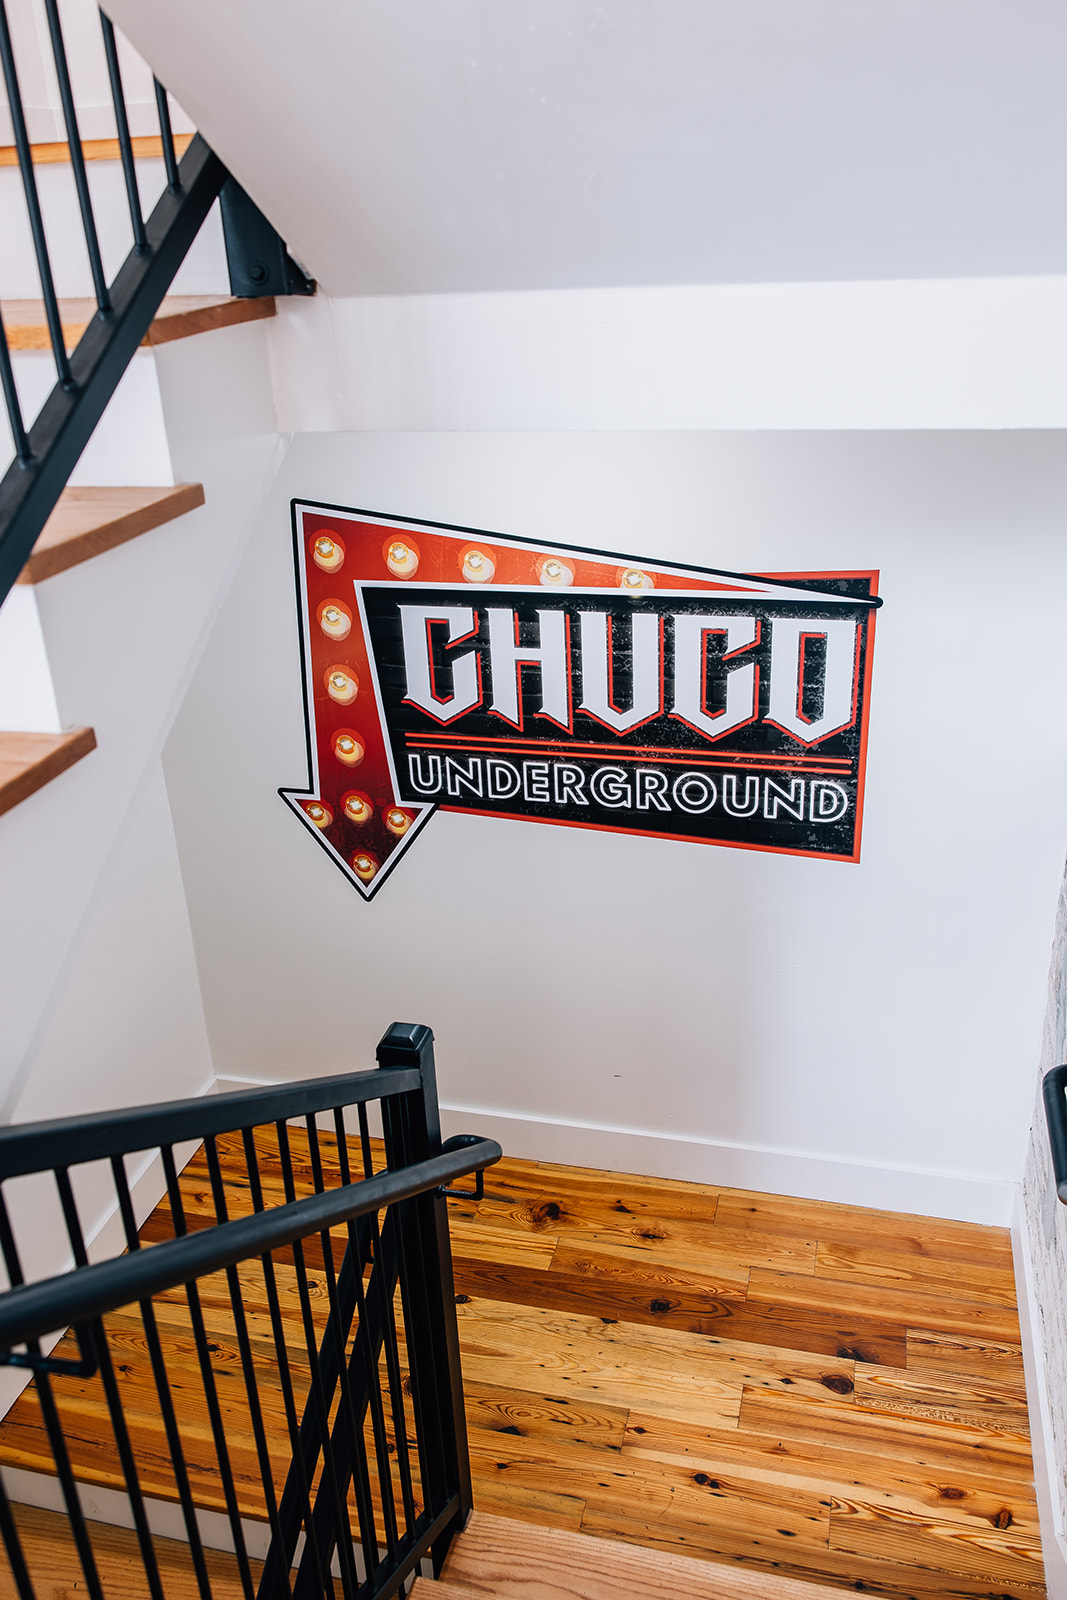 Stairs leading down to the Chuco Underground bar